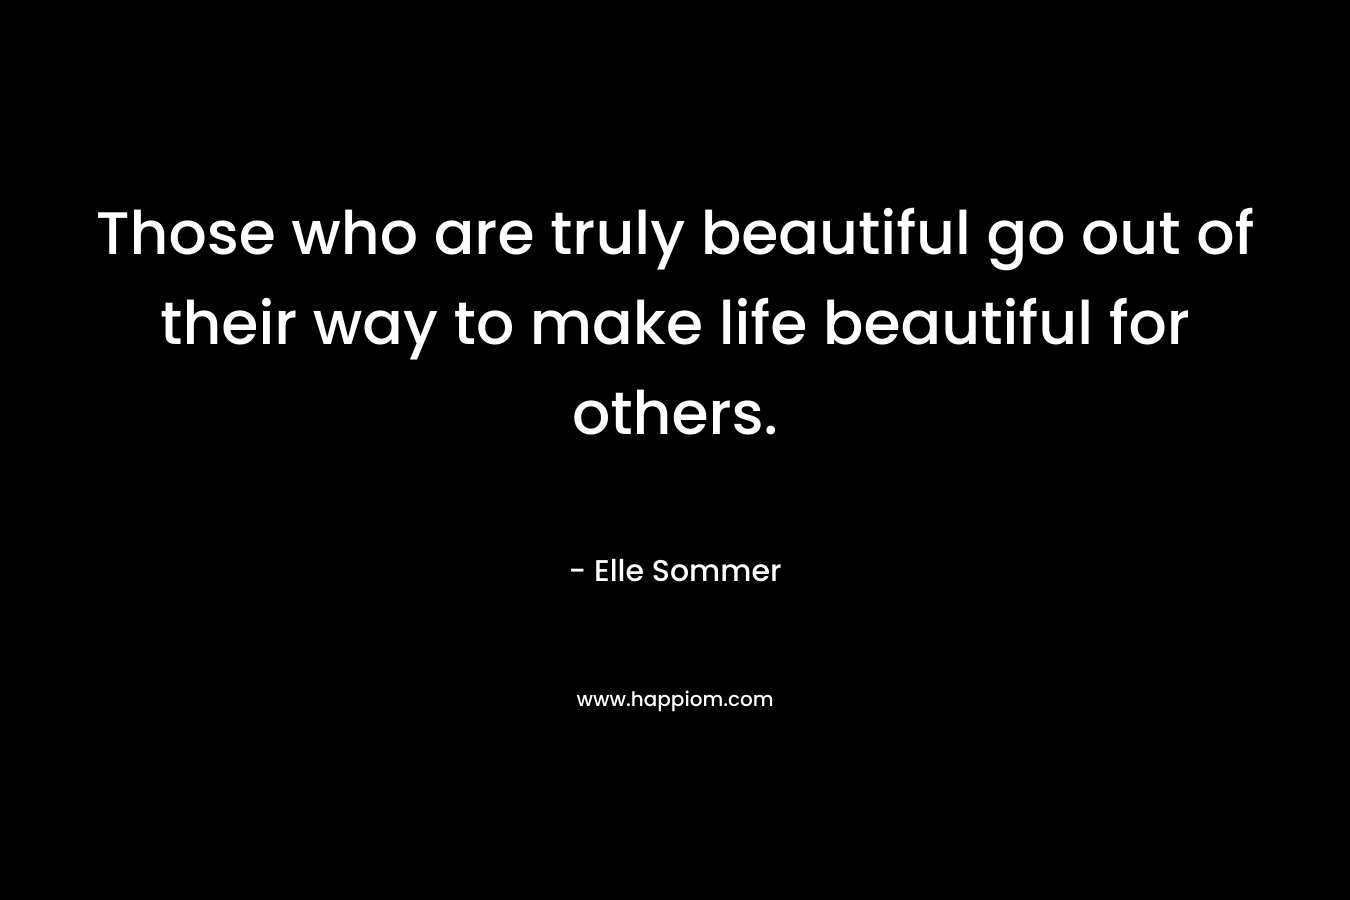 Those who are truly beautiful go out of their way to make life beautiful for others. – Elle Sommer